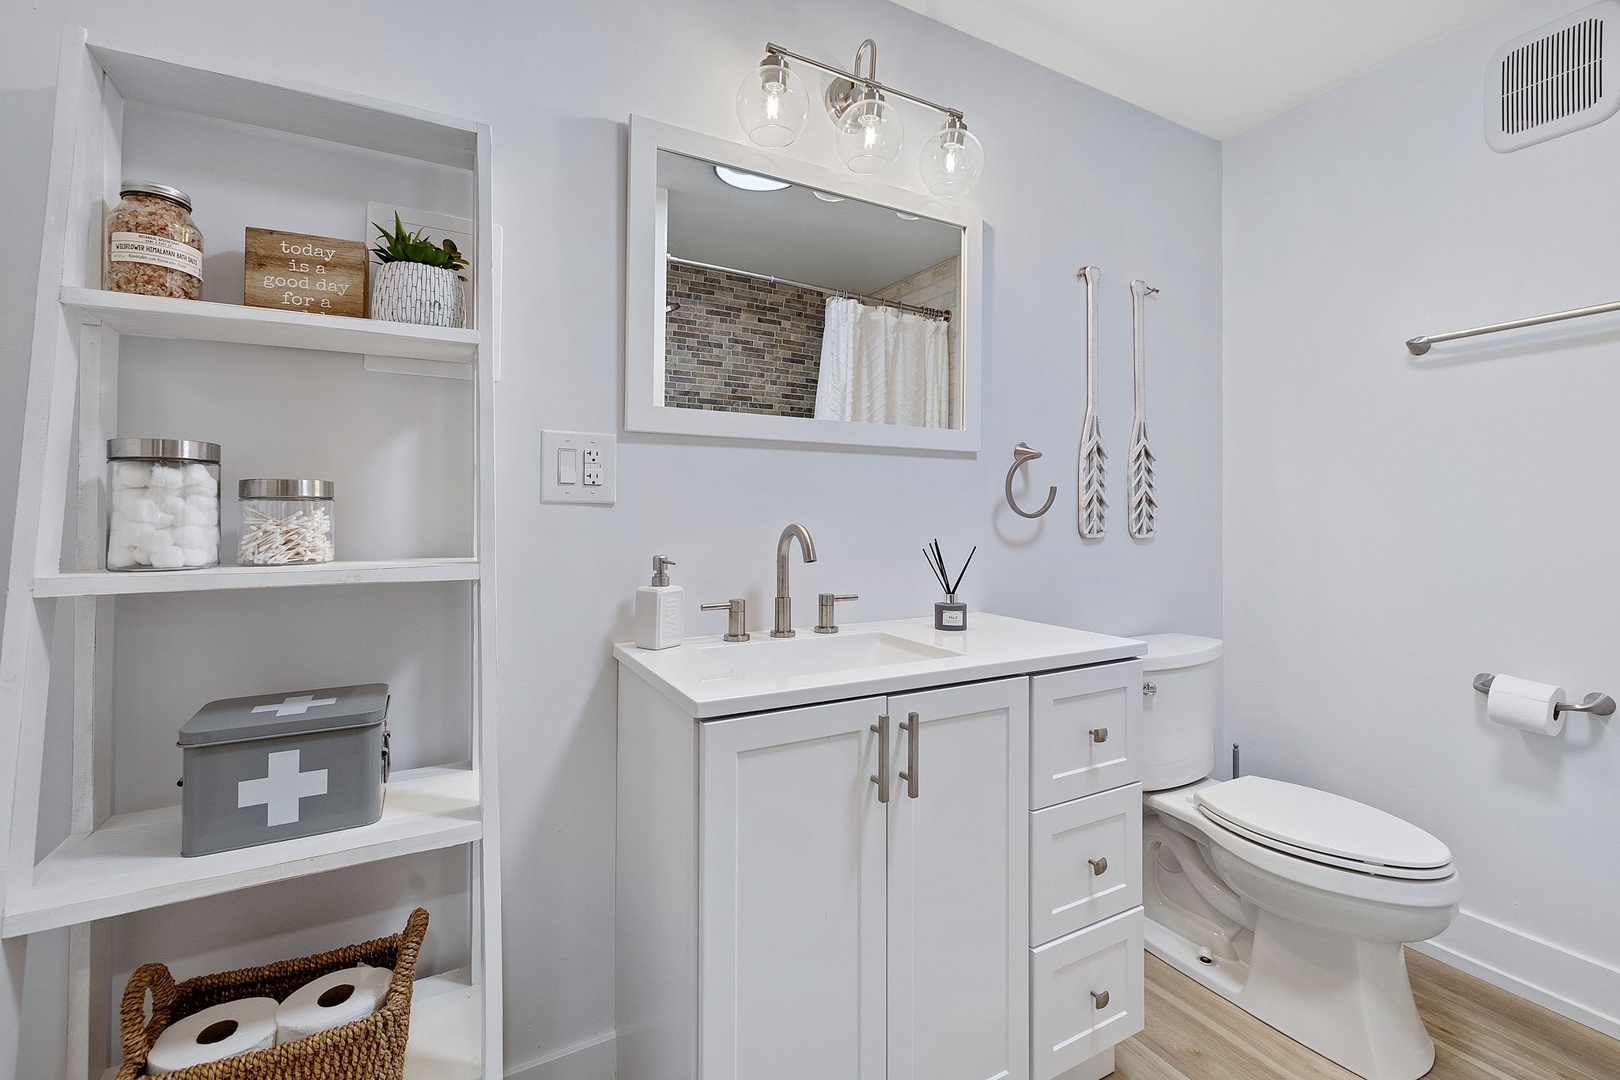 Extra bathroom has stone-top vanity and the essentials for you and your guests.